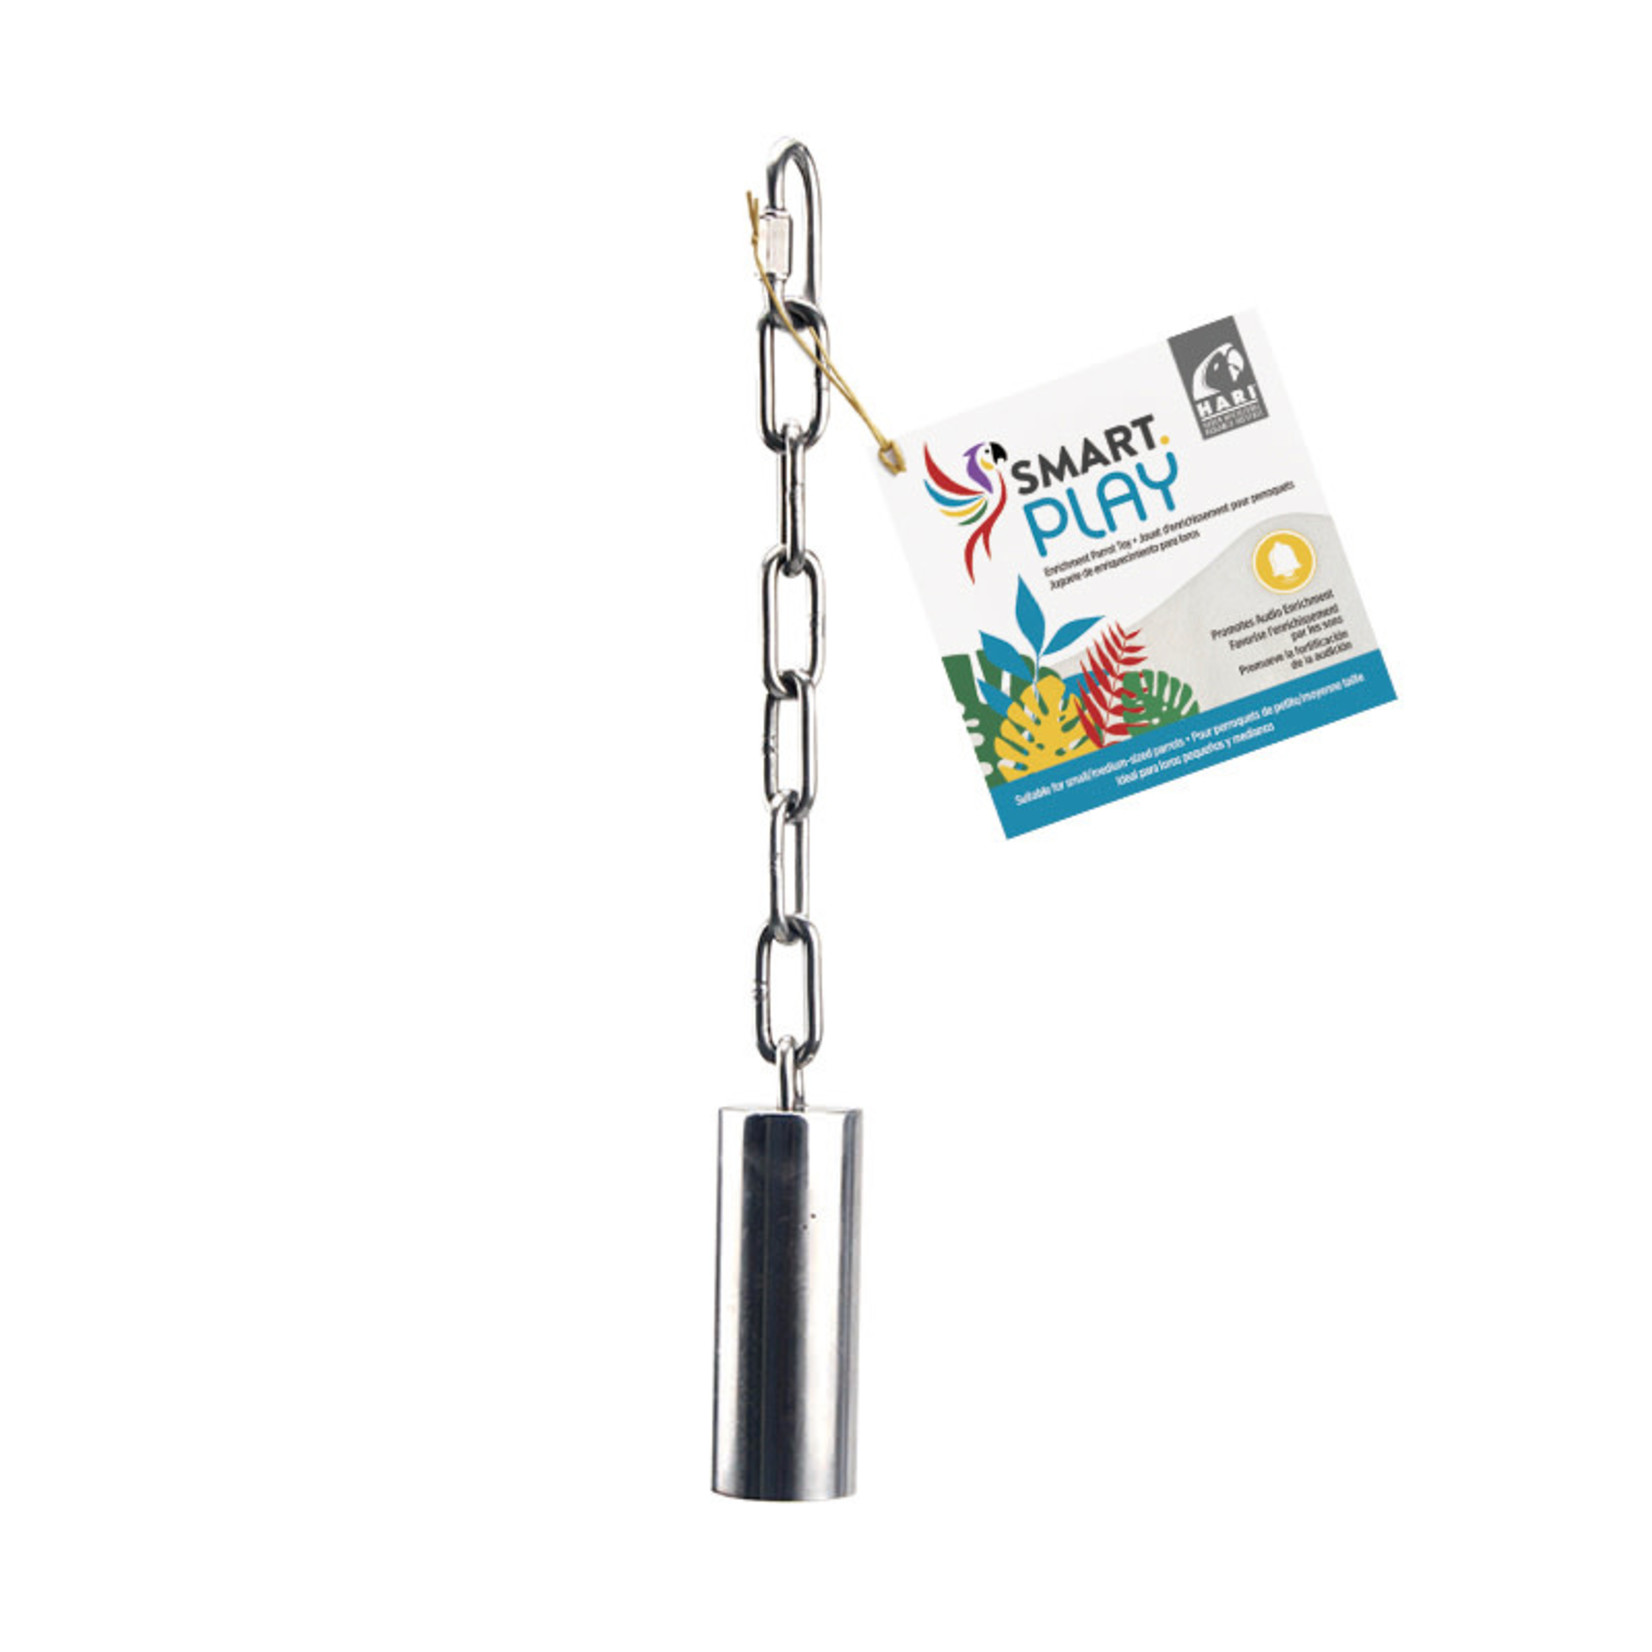 HARI HARI SMART.PLAY Enrichment Parrot Toy - Stainless Steel Bell